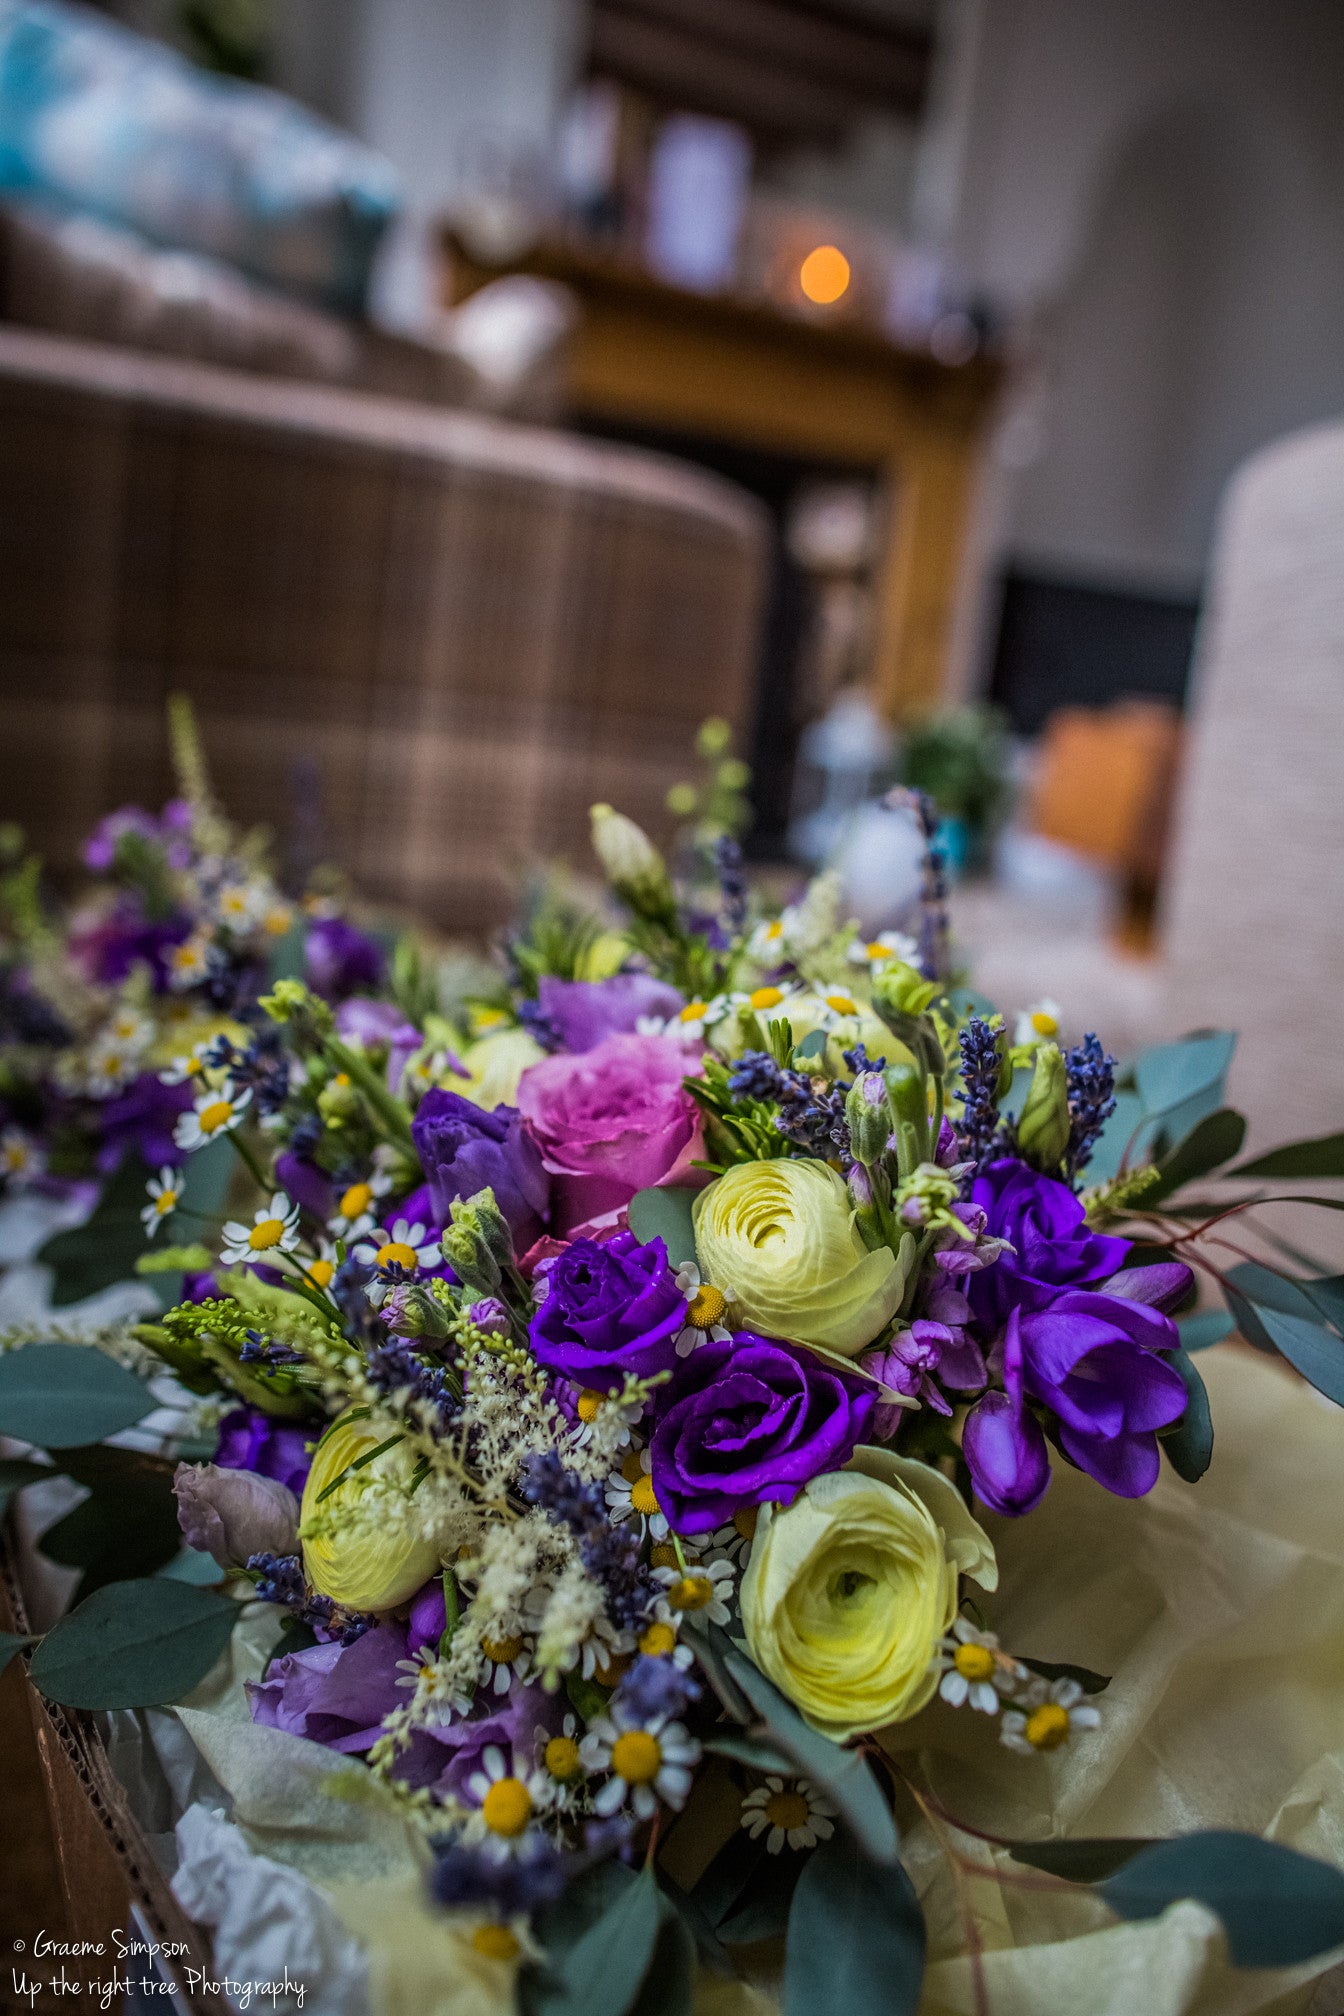 Purple Lisianthus really sets of the cream Ranunculus in this bridal bouquet.